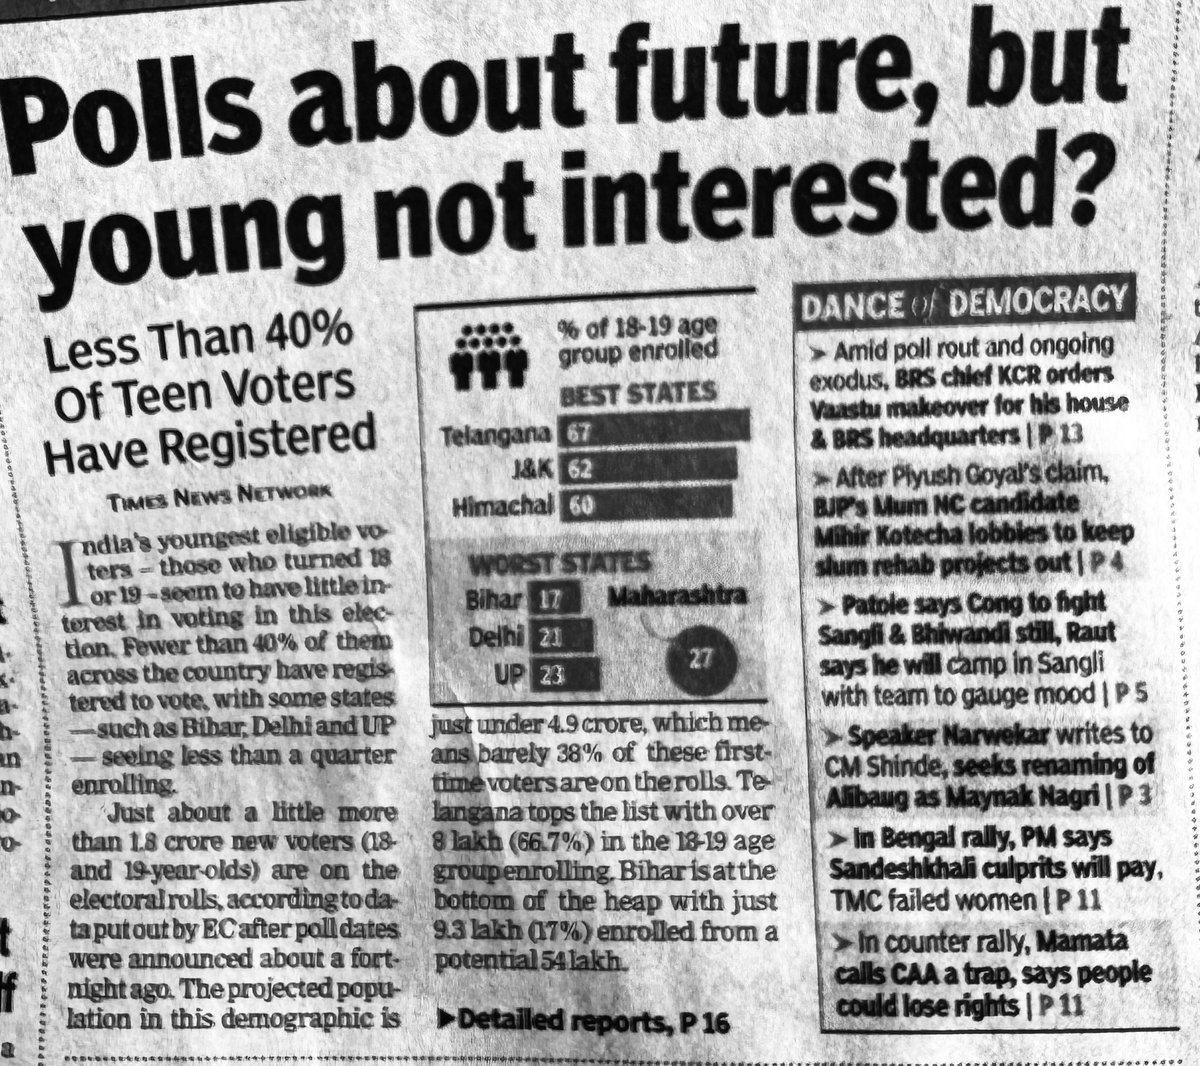 Less than 40% of first time voters have registered to vote. This is a really unfortunate trend if youth become disconnected with India’s political future and do not make their choices through their vote. #EveryVoteCounts